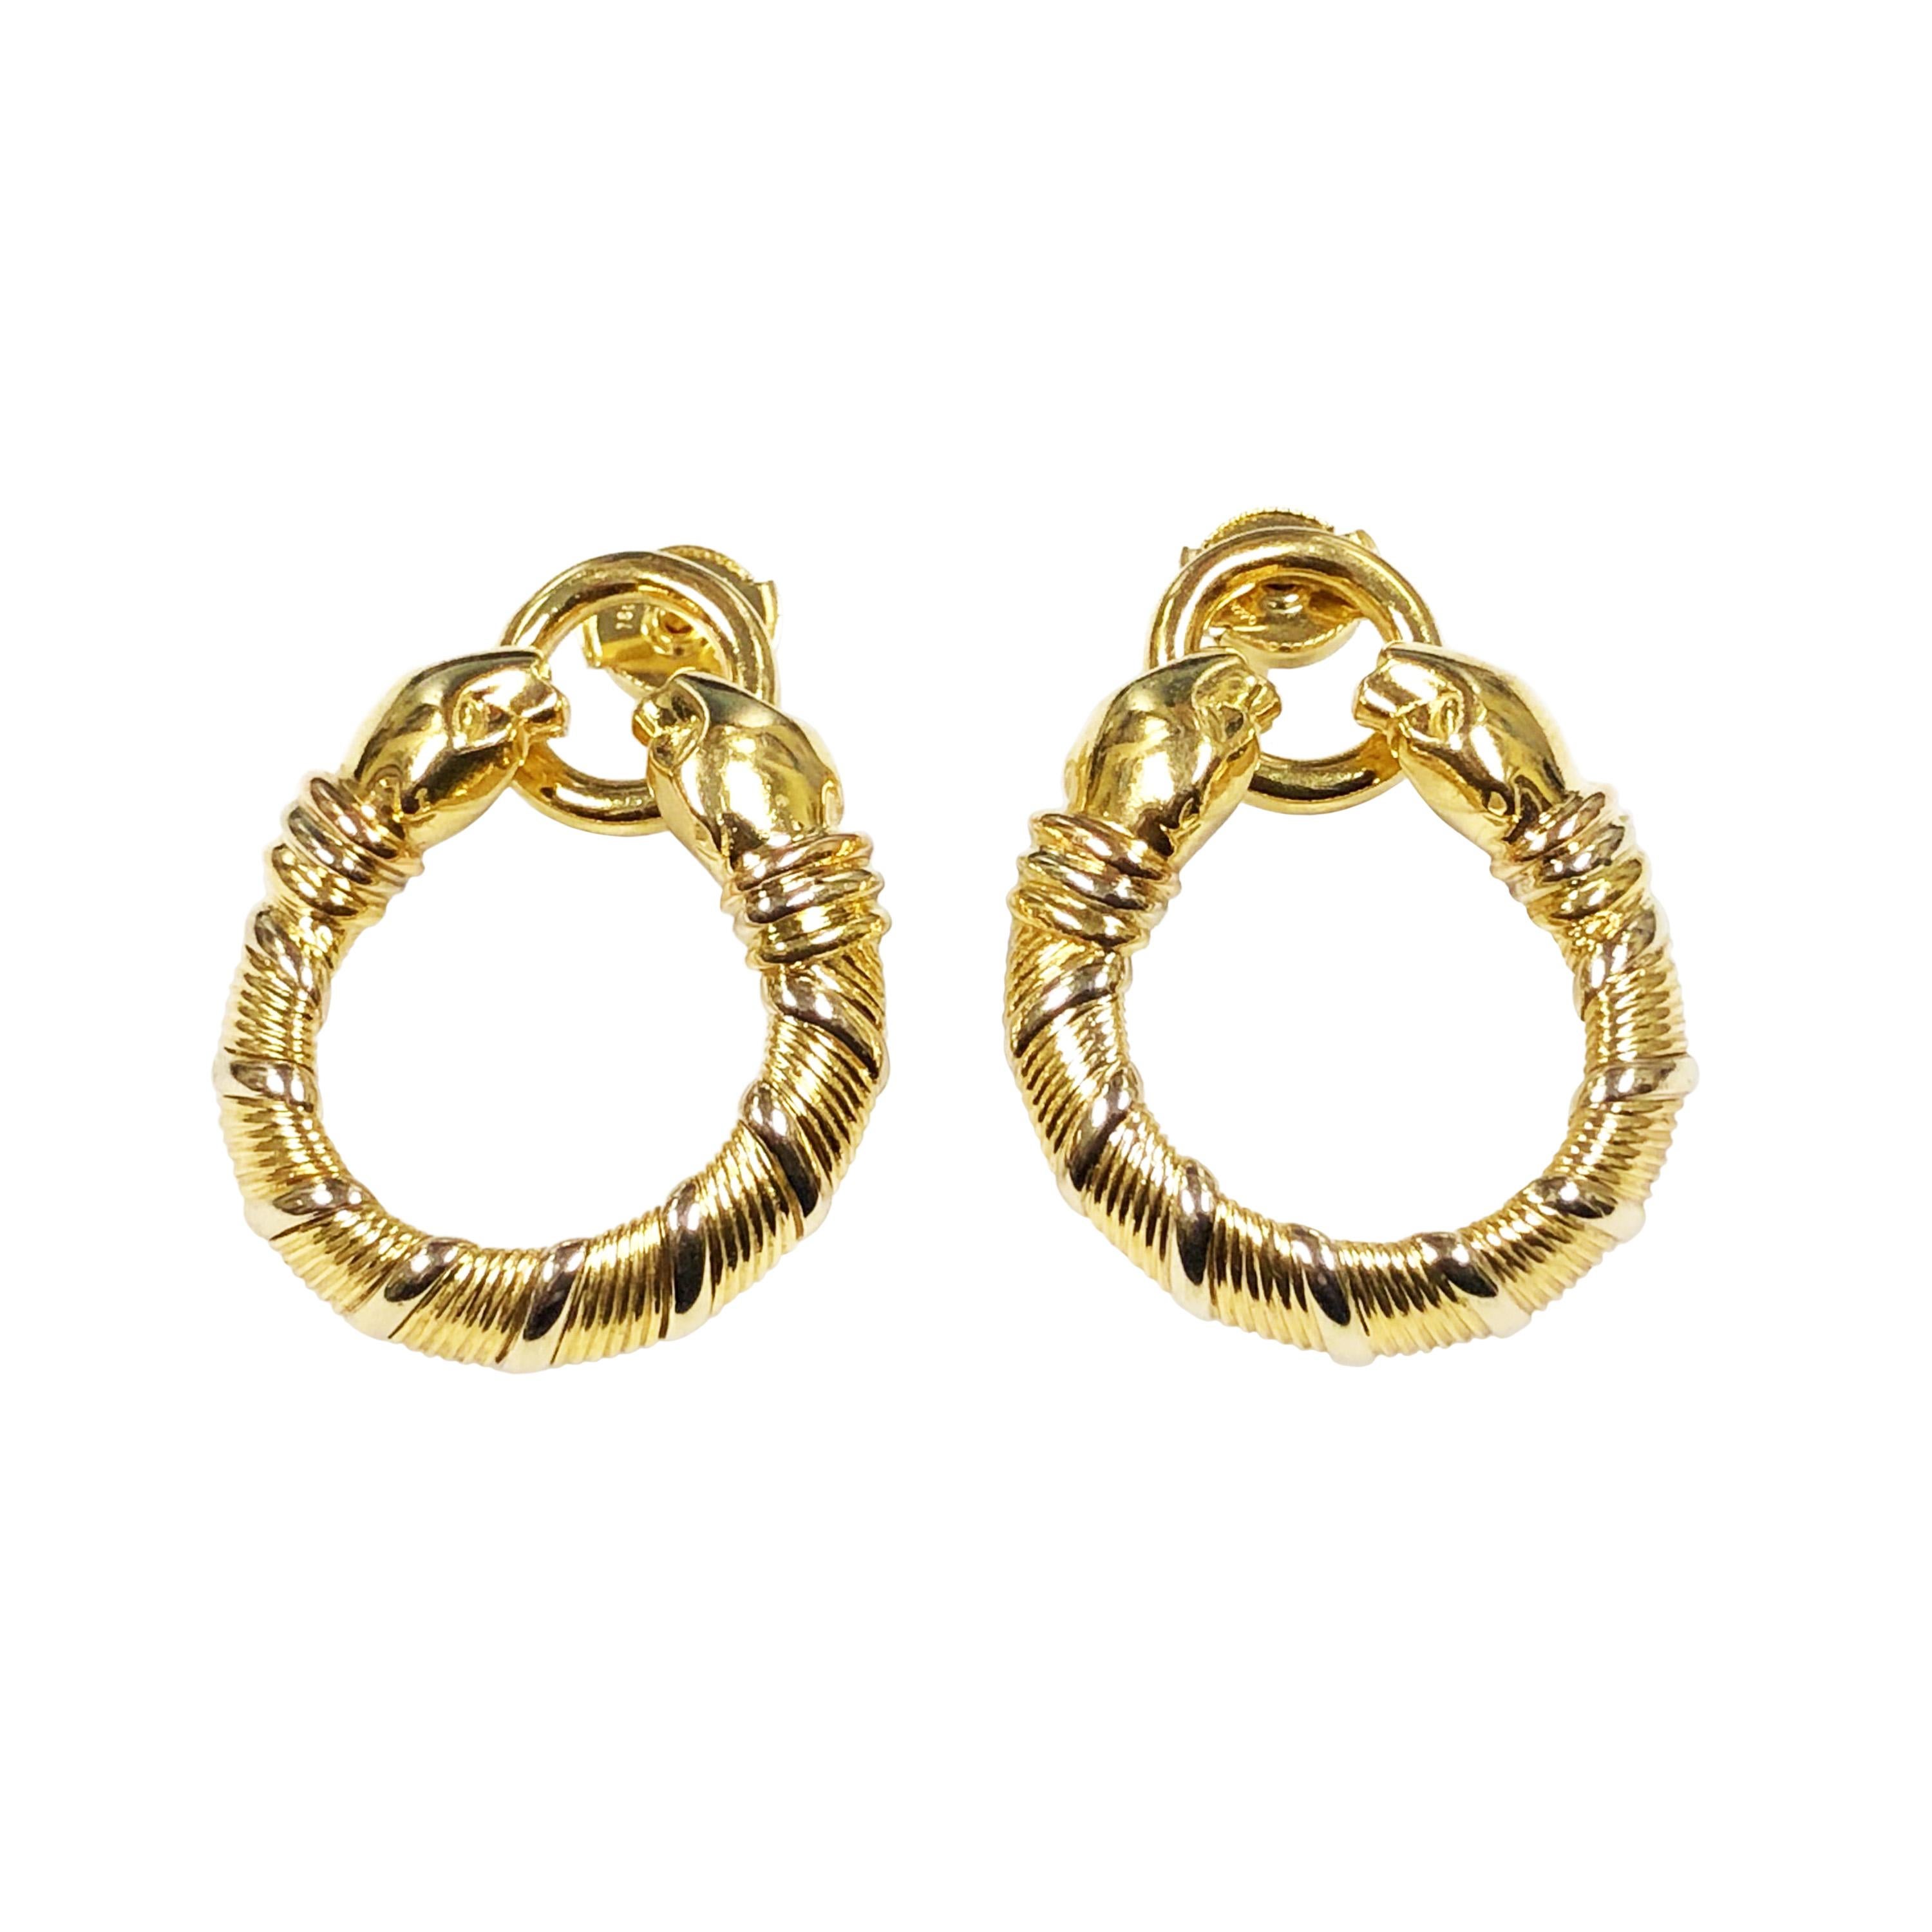 Circa 2000 Cartier Panther collection 18K Yellow Gold Hoop Earrings, measuring 1 3/8 inch in length and 1 1/8 inch in diameter. Having  Posts with Pressure fit backs. 